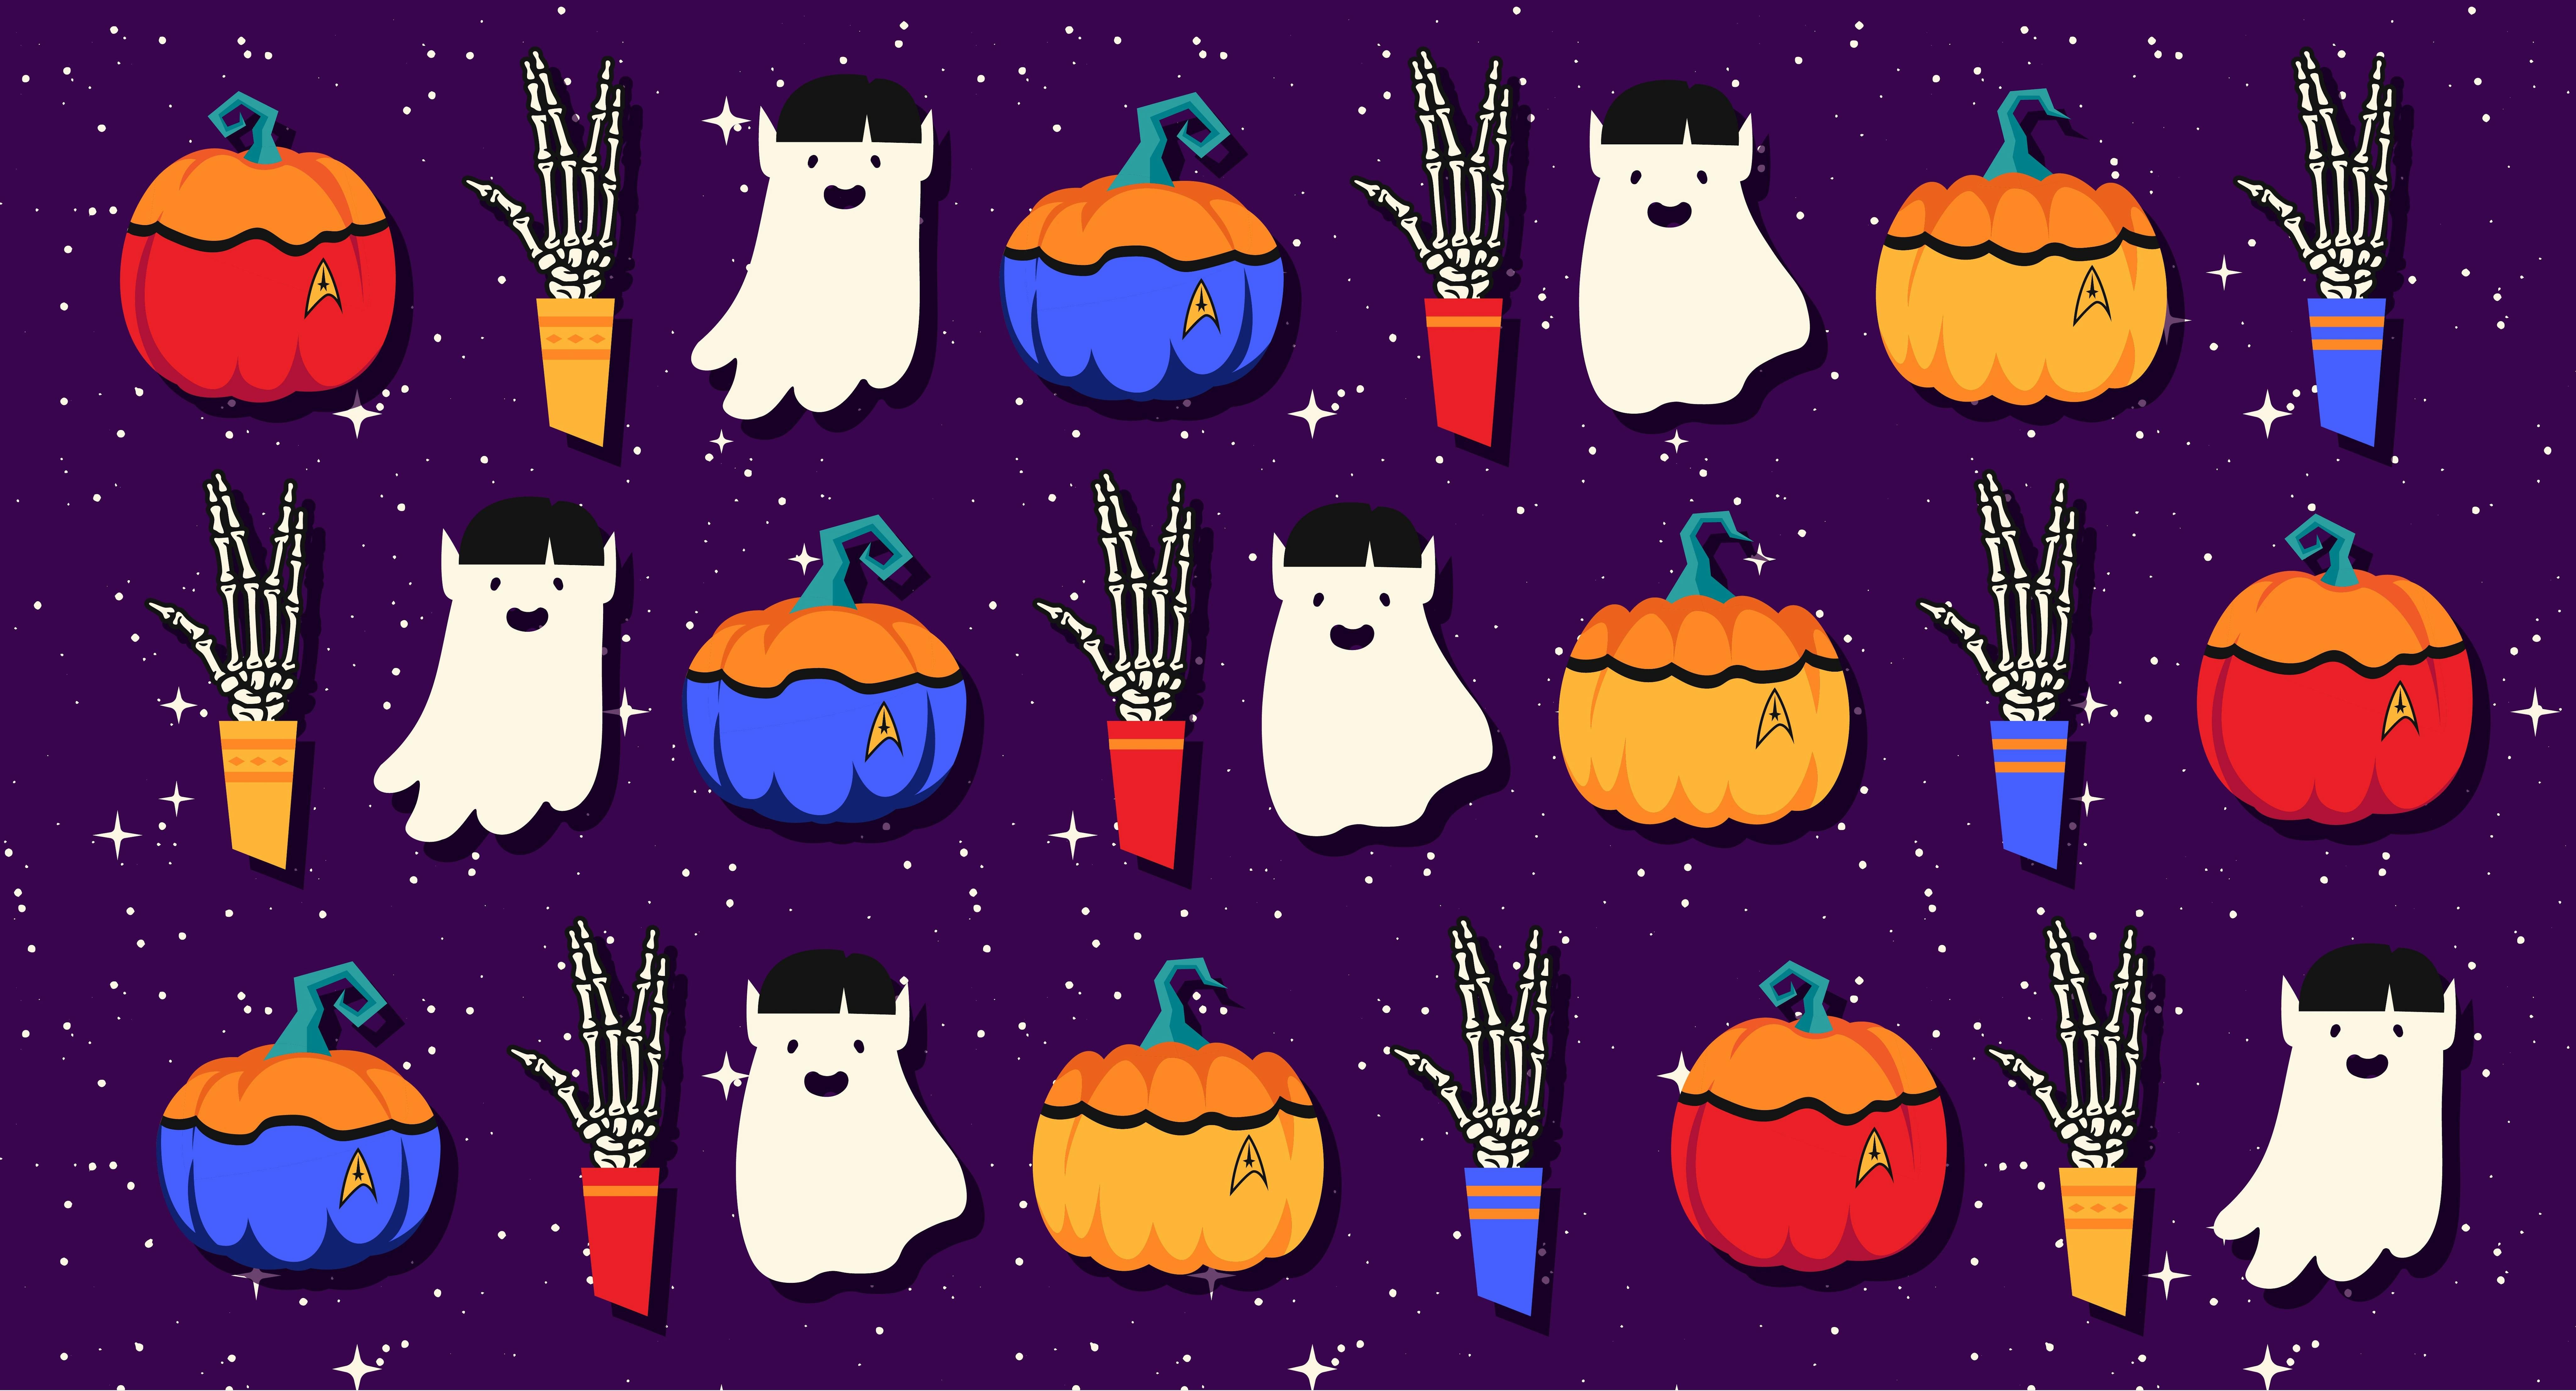 A repeated pattern of pumpkins in Starfleet uniforms, Vulcan ghosts, and skeletal hands giving the Vulcan salute are set against a purple backdrop.